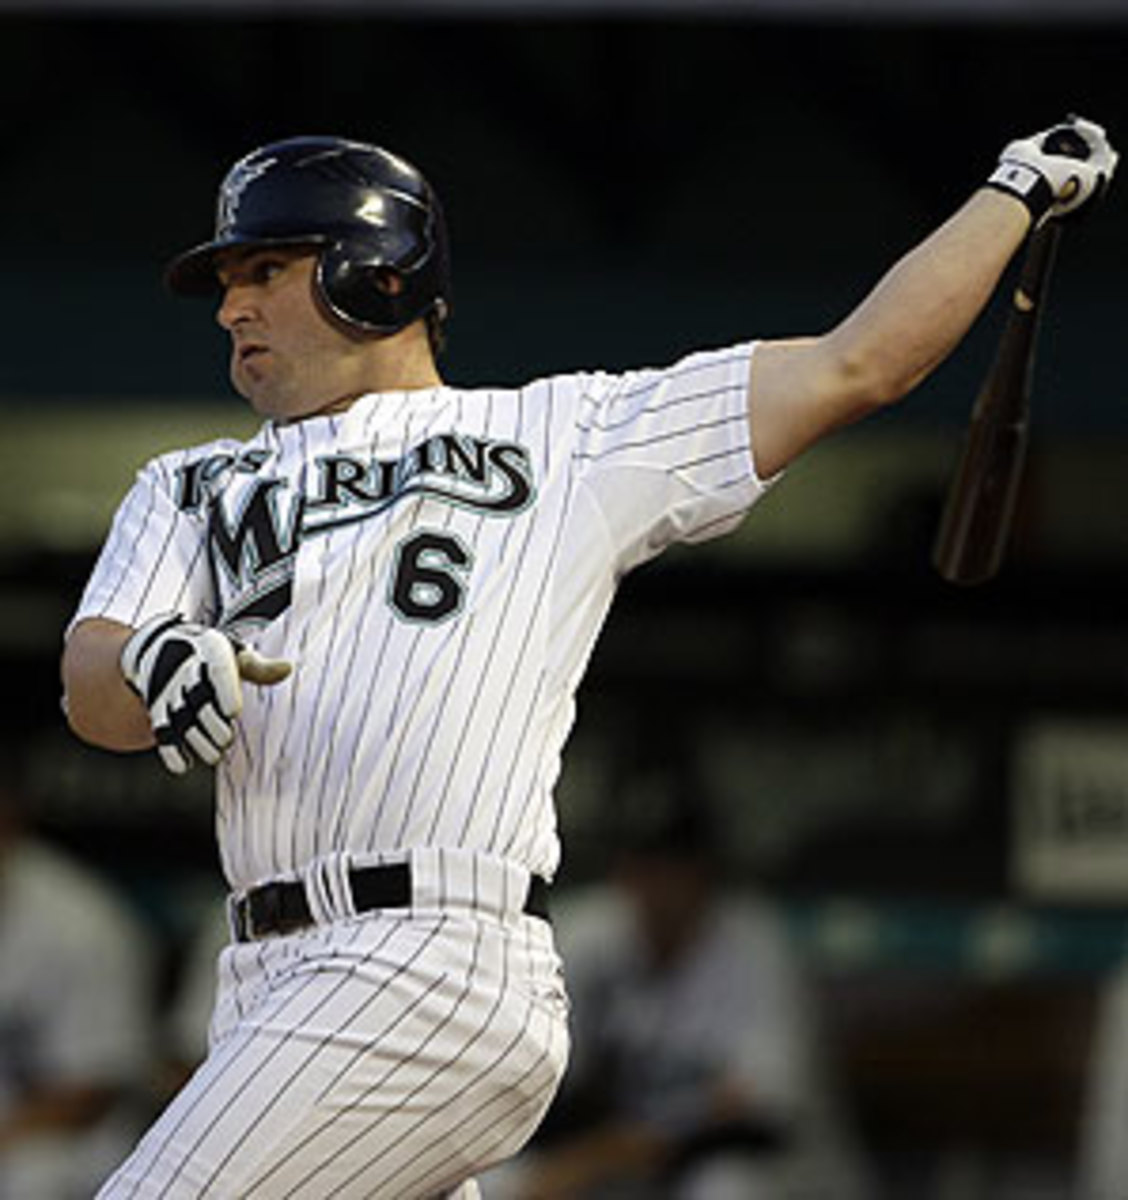 Marlins offer Uggla four-year deal - Sports Illustrated